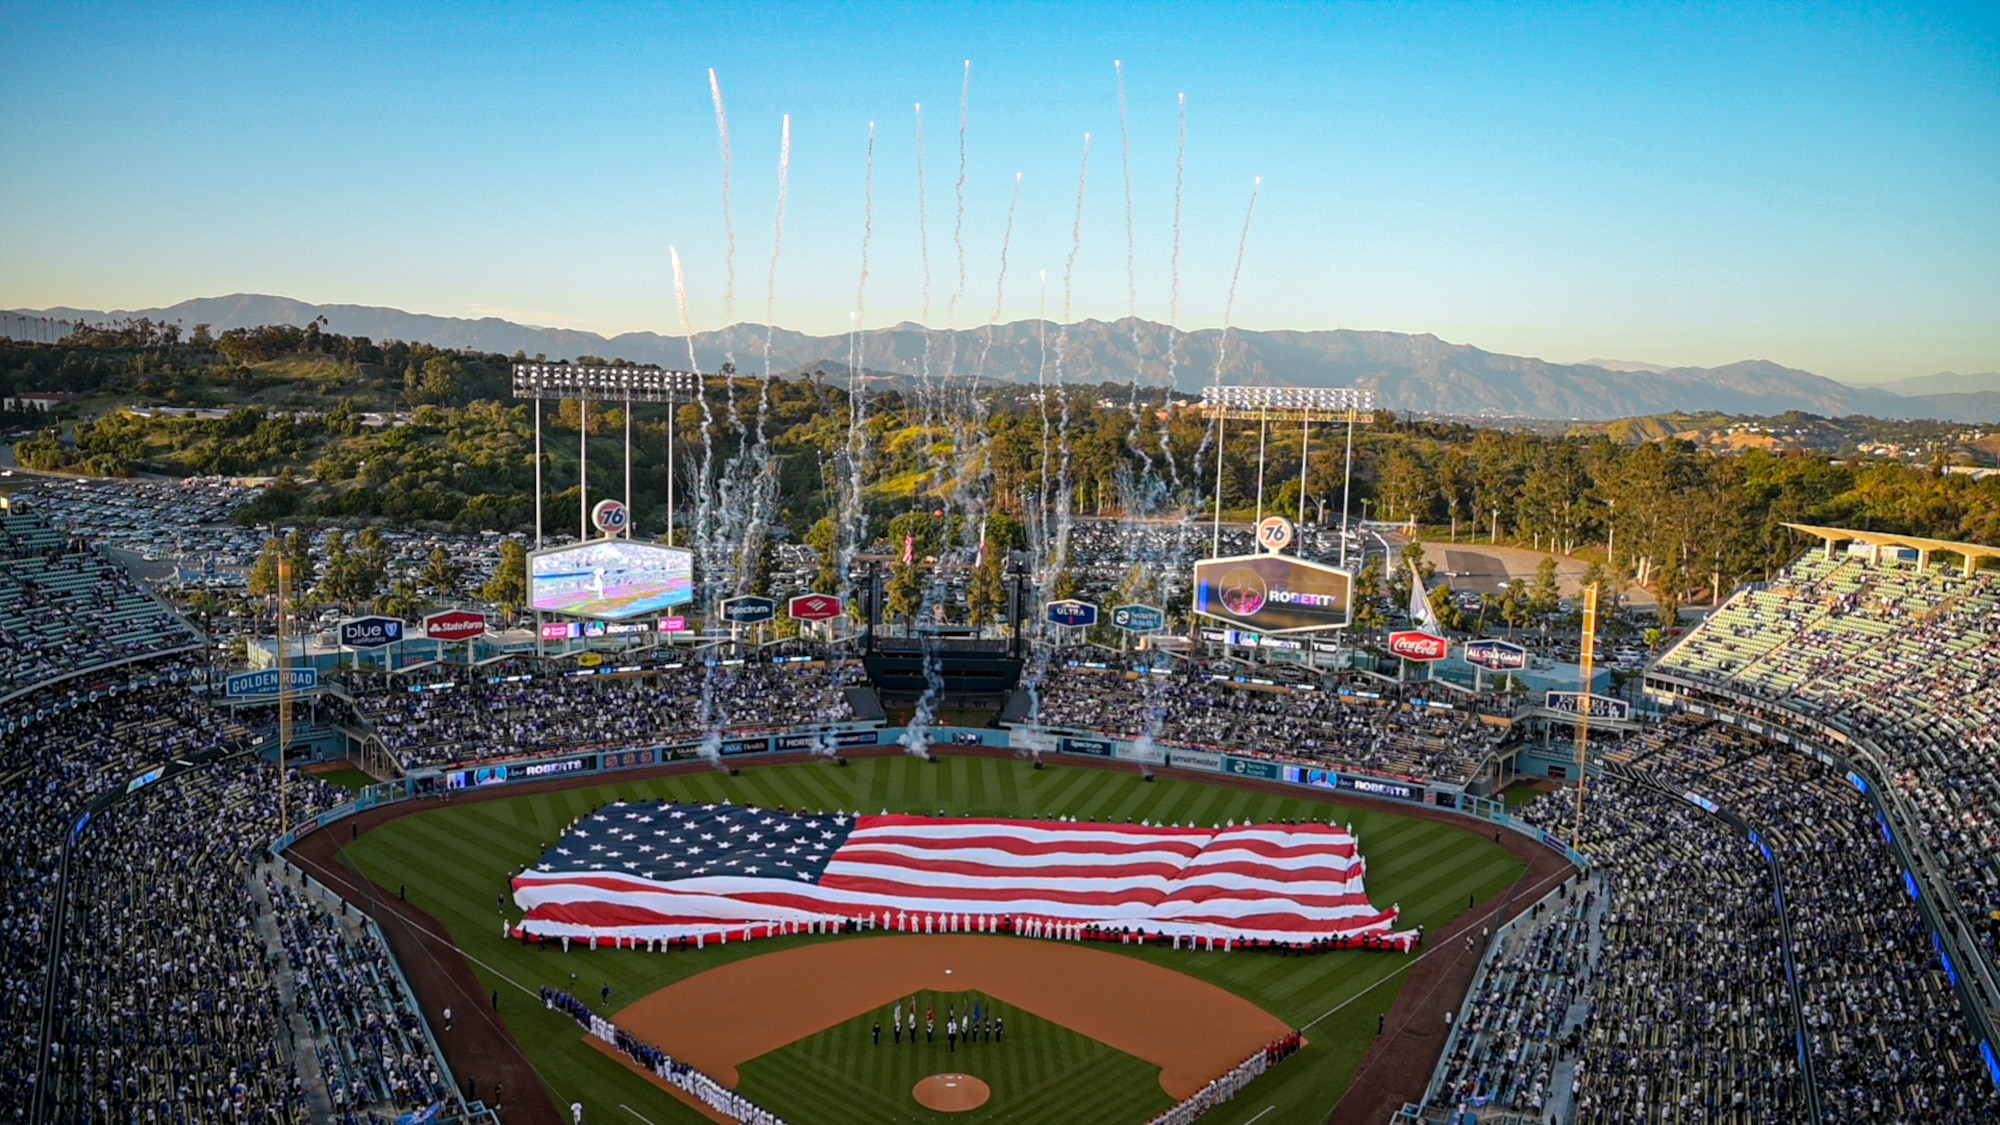 Two F-35's from the 461st Flight Test Squadron conducted an integrated test mission with a flyover for the Dodgers home opener against the Cincinnati Reds.